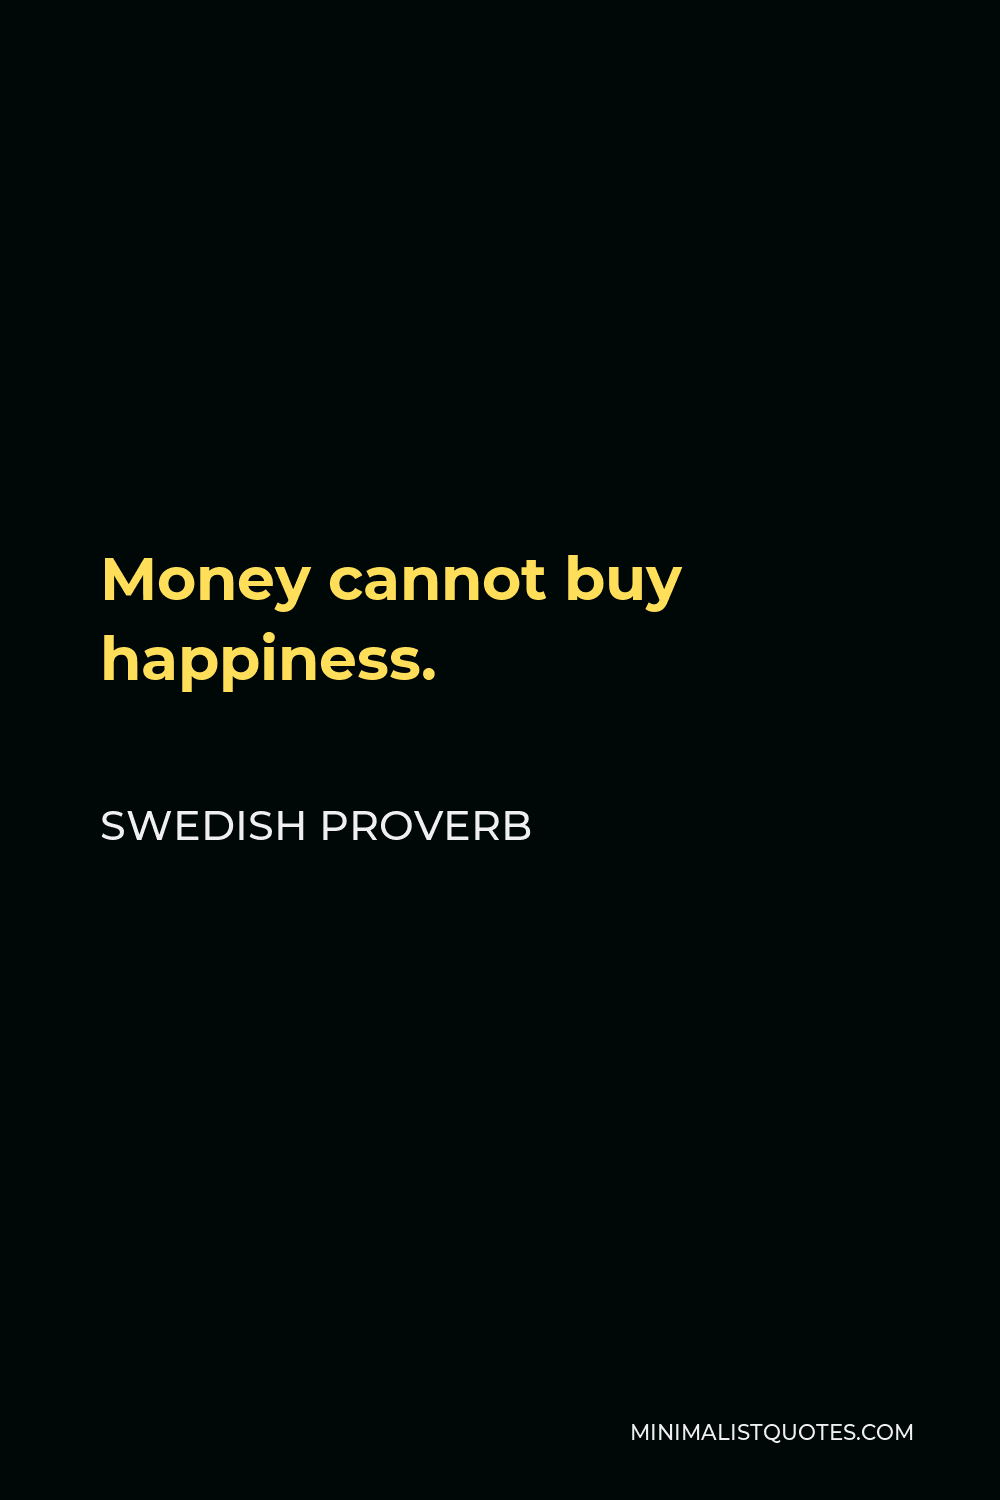 Swedish Proverb Quote - Money cannot buy happiness.